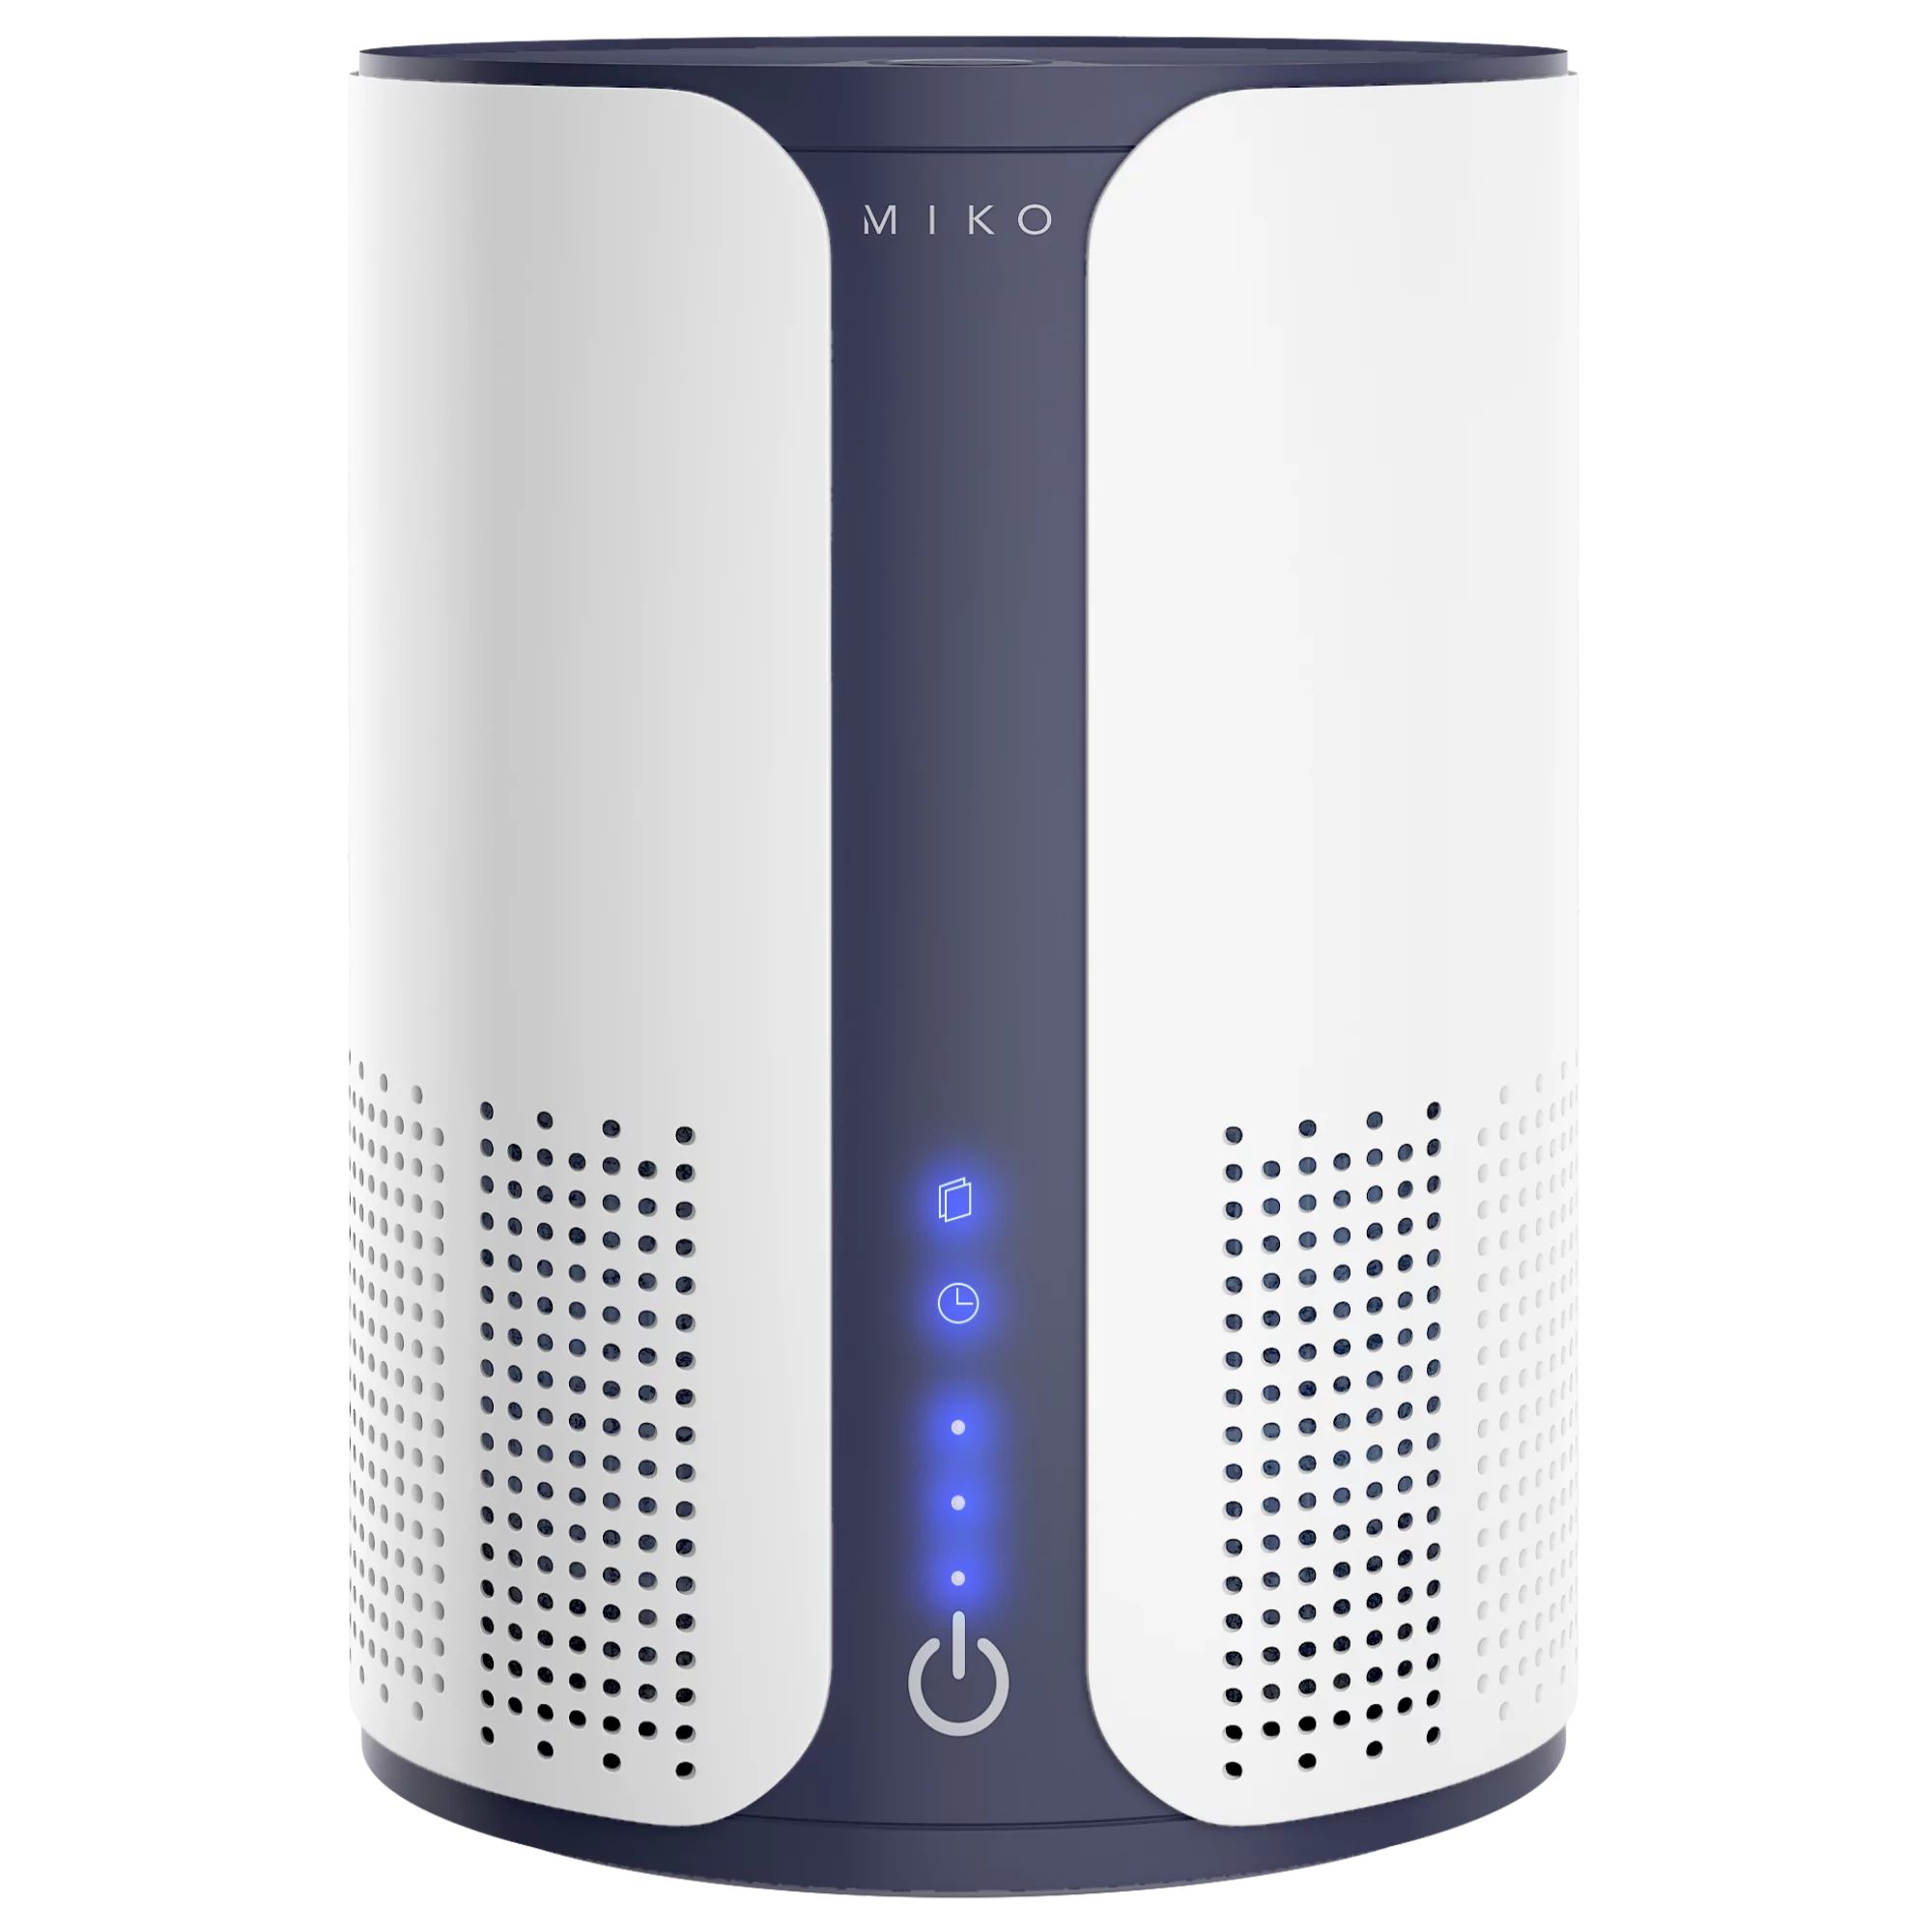 Miko Home Air Purifier with Multiple Fan Speeds, True HEPA Filter to Safely Remove Dust, Pollen, ... | Walmart (US)